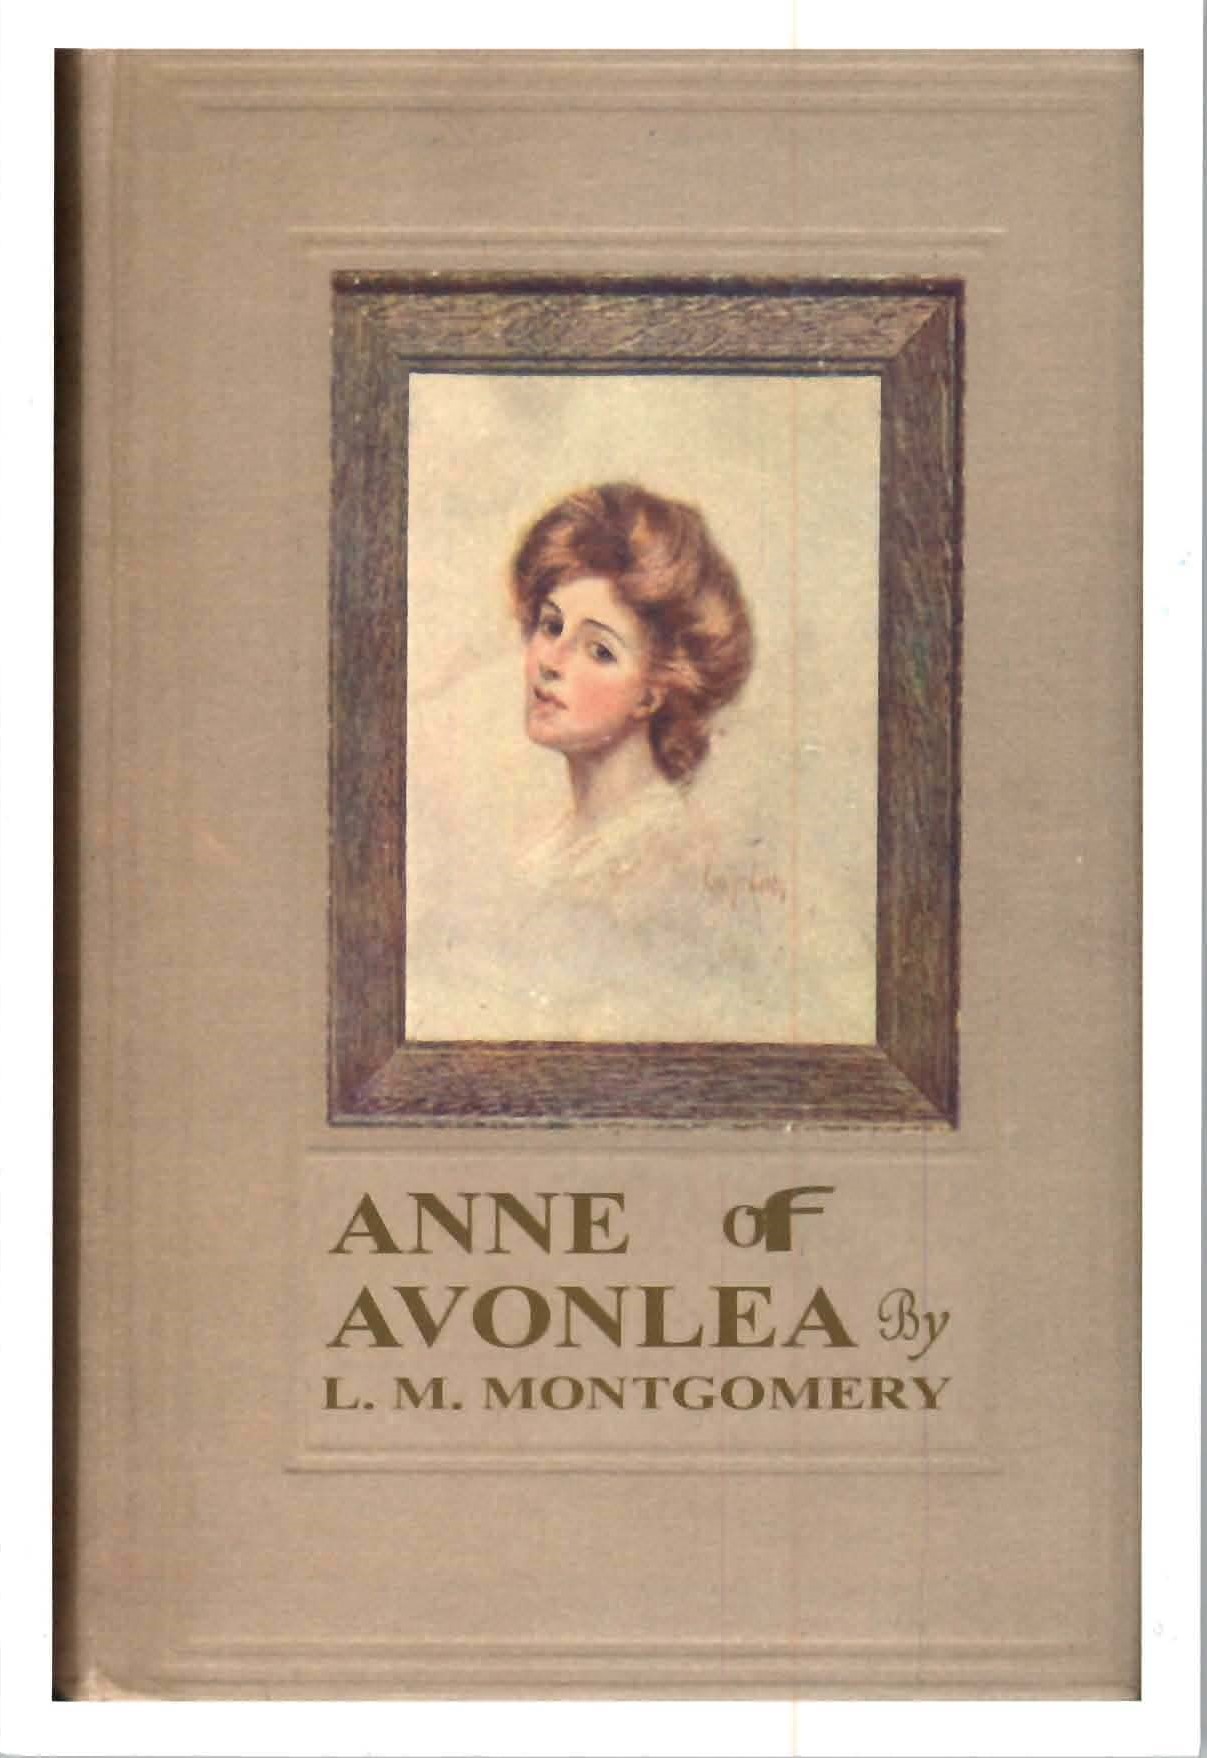 Postcard sowing original book cover of Anne of Avonlea by L. M. Montgomery